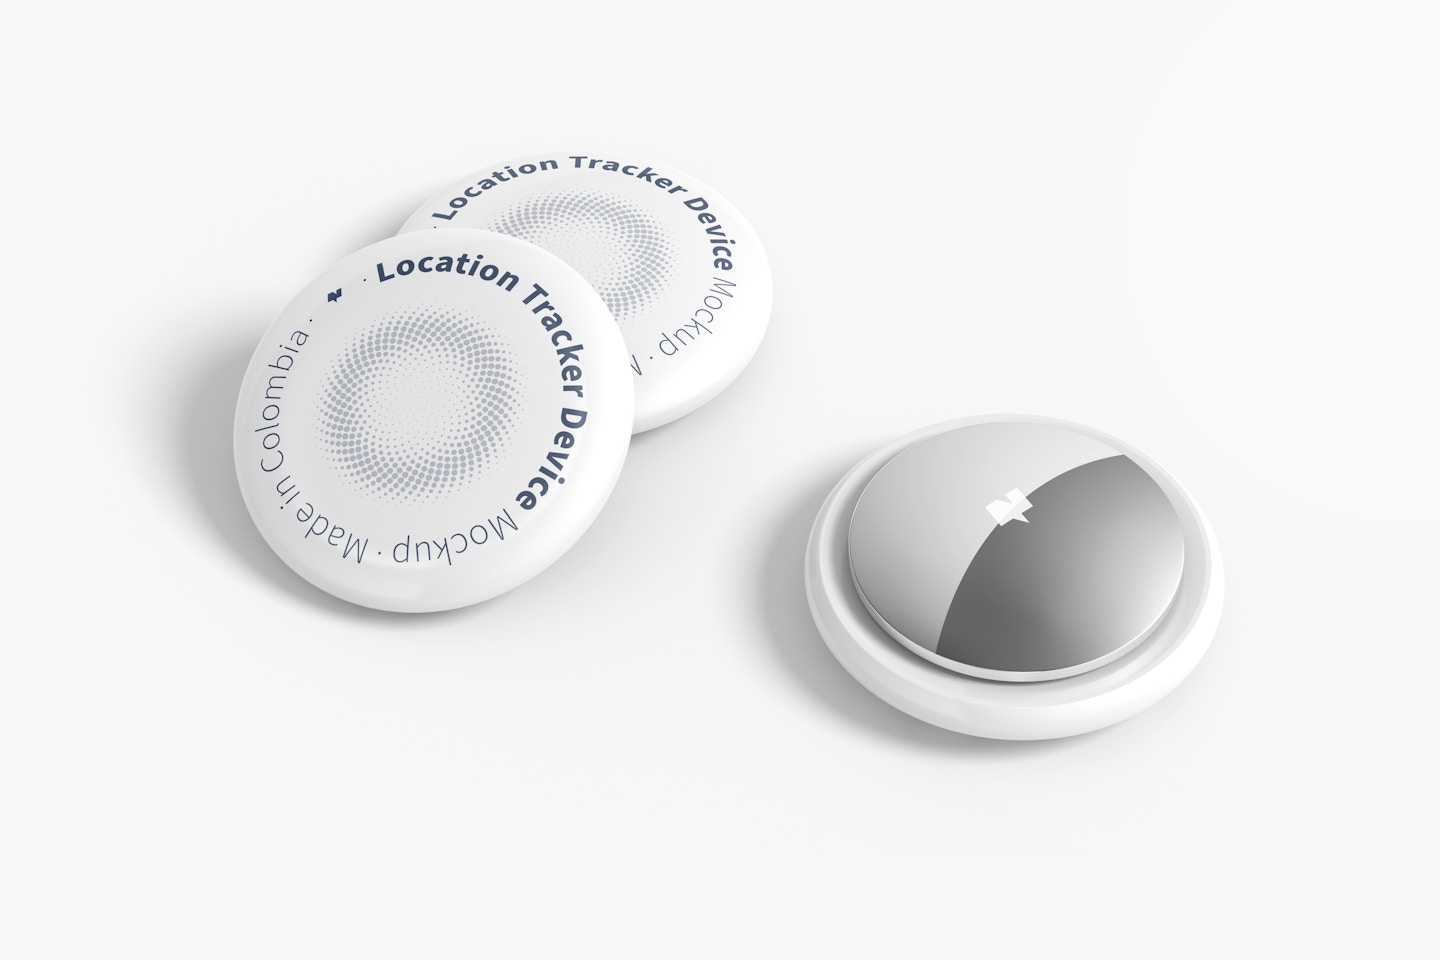 AirTags Mockup, Perspective View 02